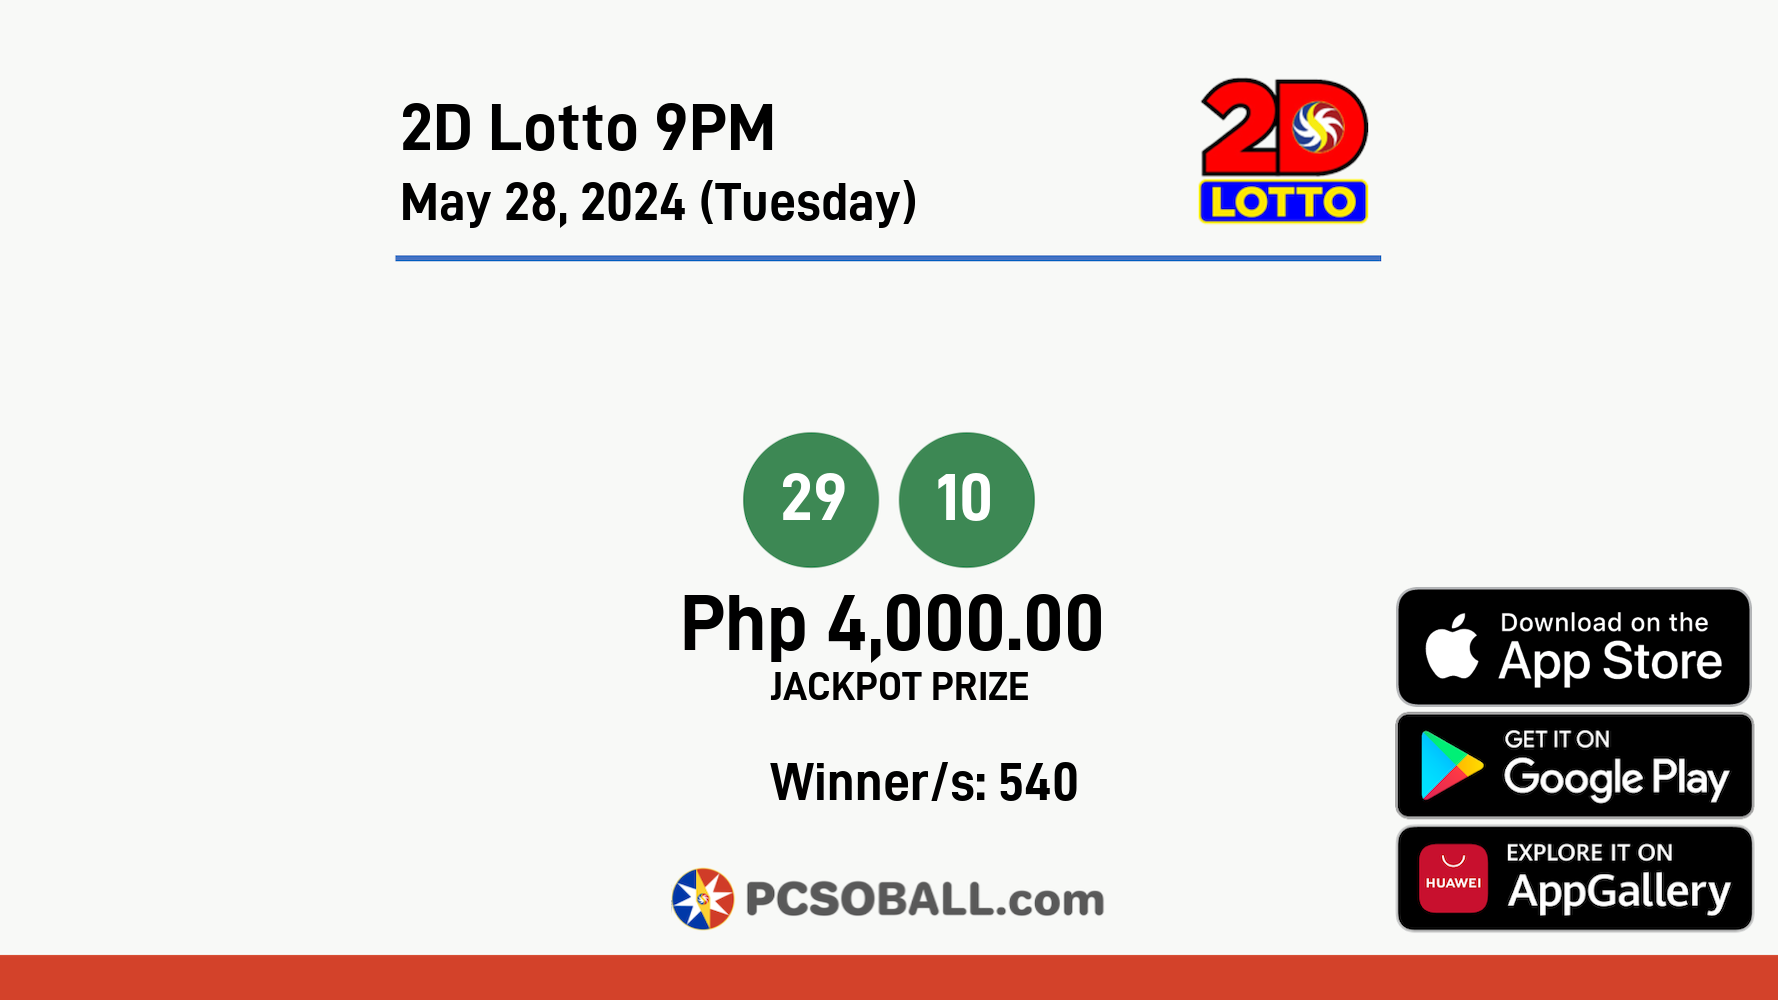 2D Lotto 9PM May 28, 2024 (Tuesday) Result